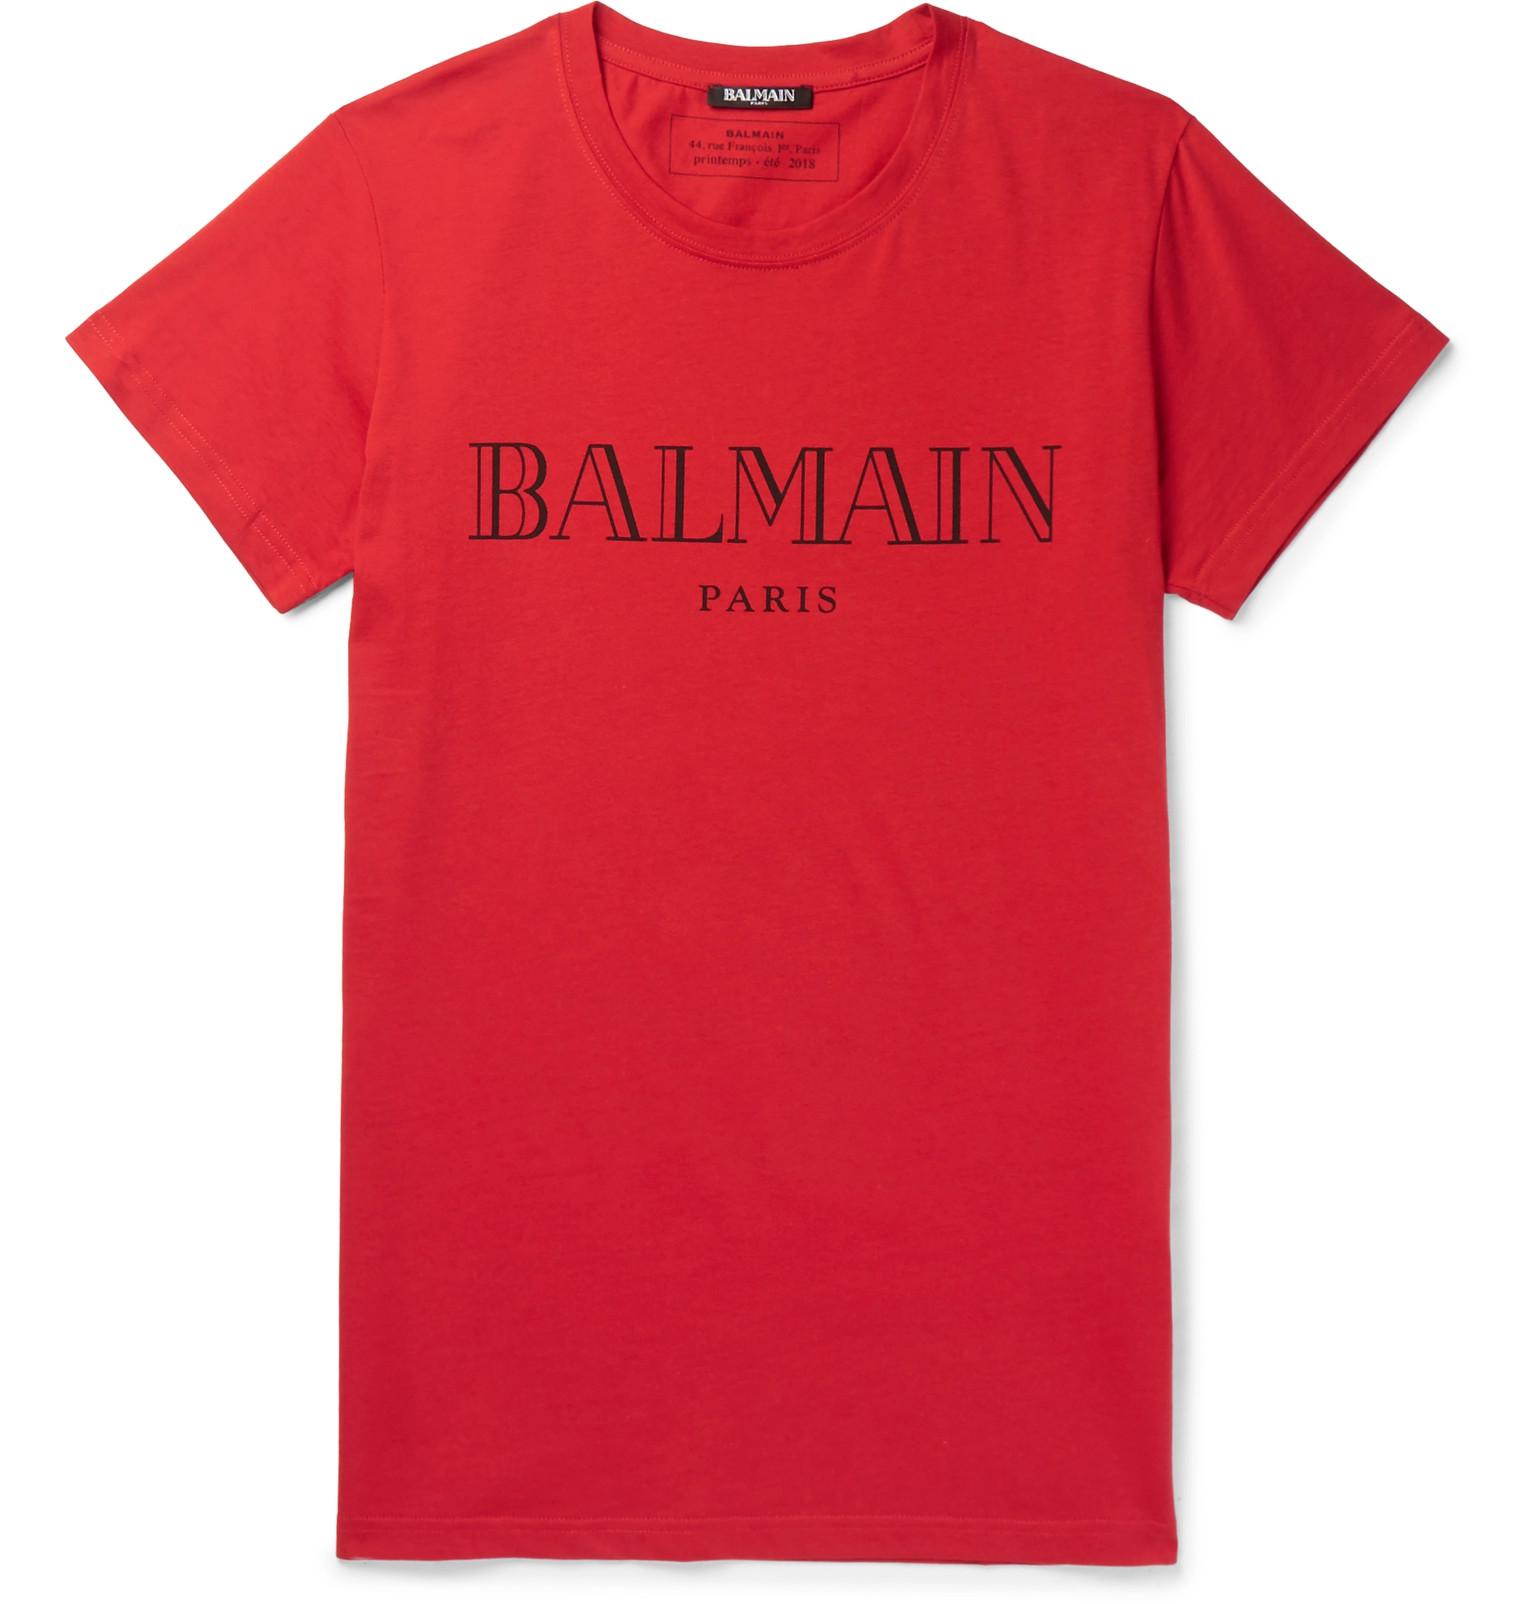 Lyst - Balmain Slim-fit Printed Cotton-jersey T-shirt in Red for Men